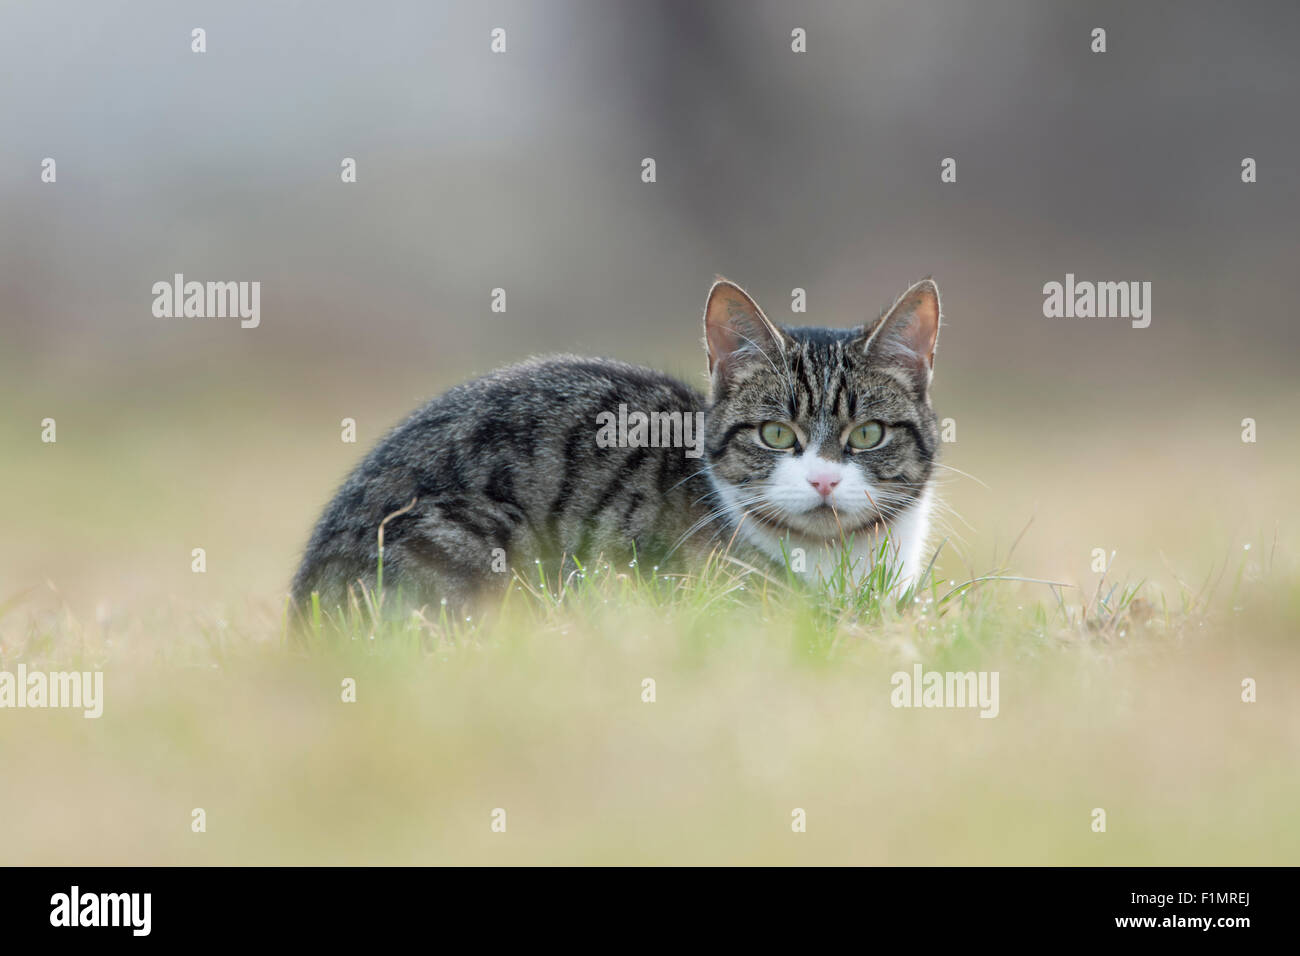 Felis silvestris catus / Domestic cat, Cat, Hauskatze, Katze with nice clear eyes lies in gras looking to the photographer. Stock Photo